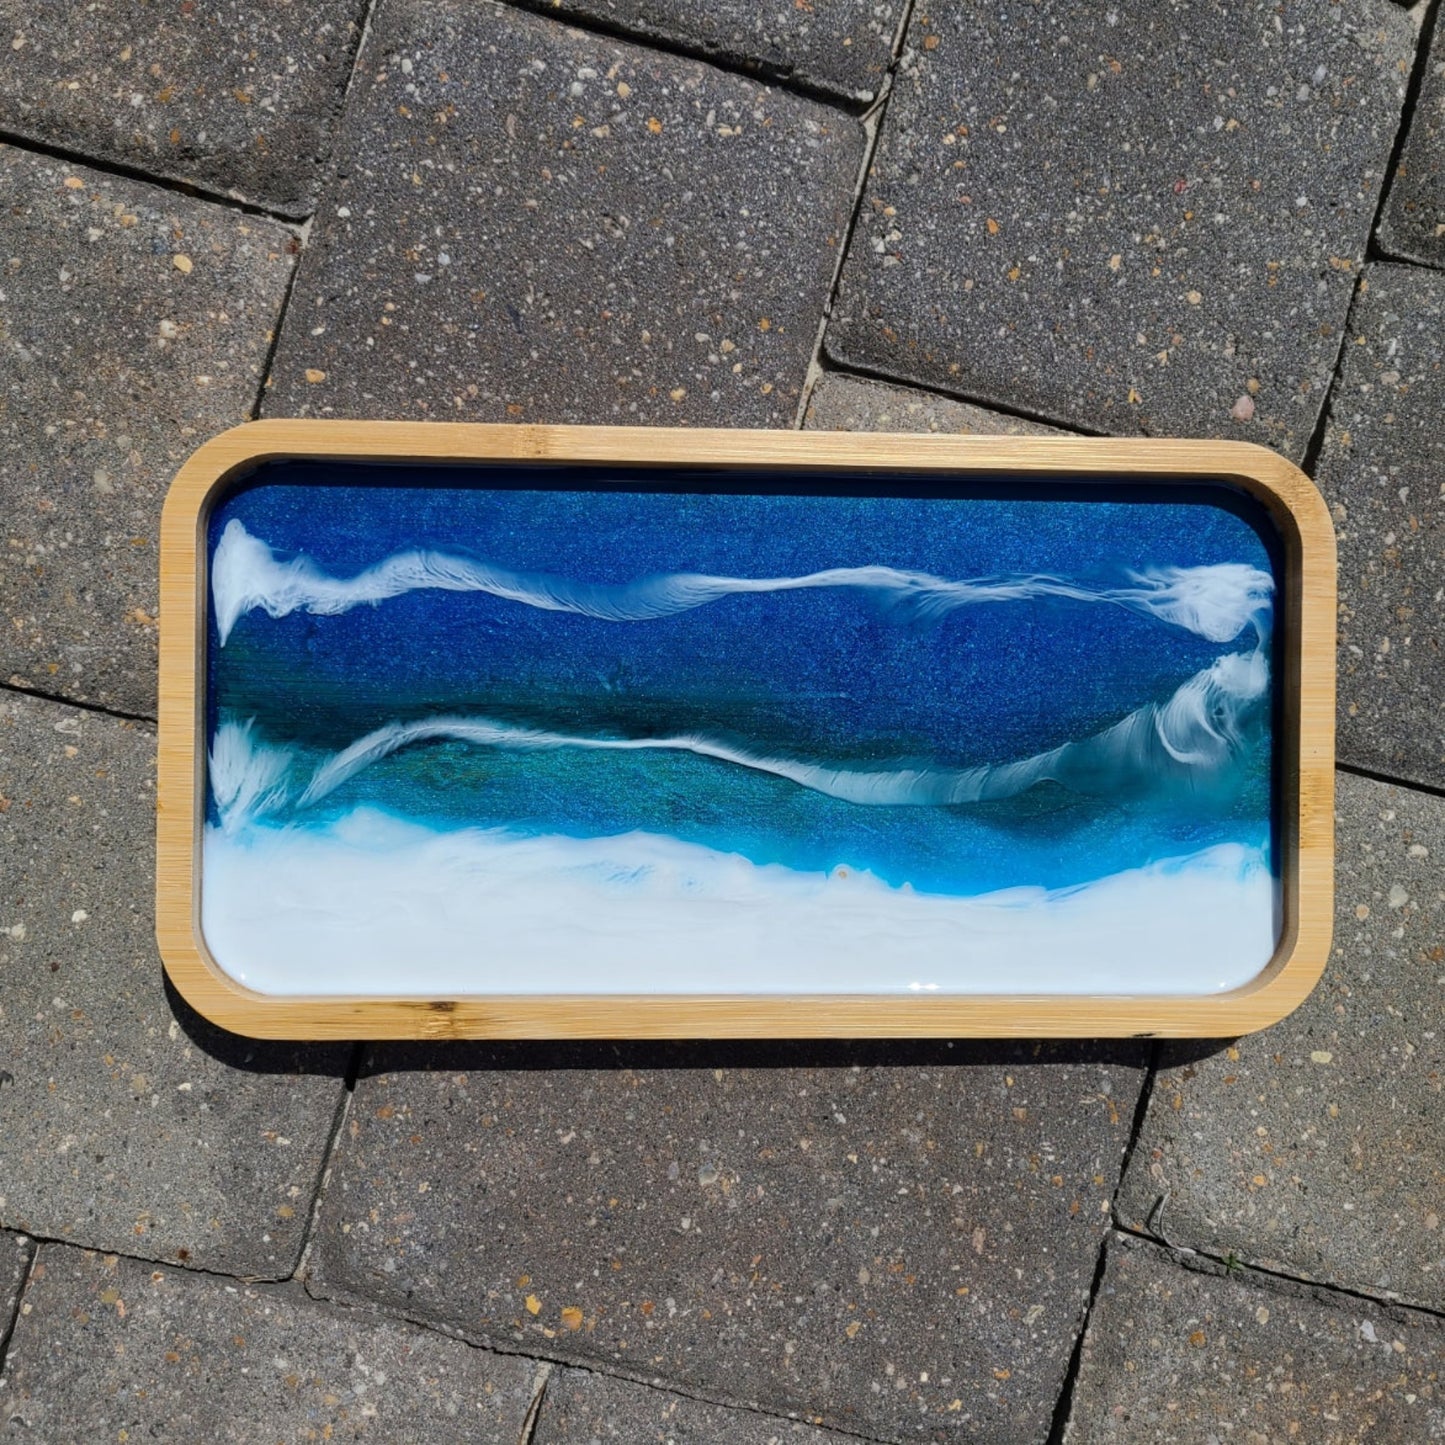 This little tray is lightweight and functional as well as beautiful. Rectangular tray with rounded corners.  Deep blue and turquoise waters hit the white sandy beach.  White waves play among the sparkling waters.  Approximate size: 11.75 x 6.25 x .75 inches  Care: Wipe with a damp cloth or an alcohol wipe.